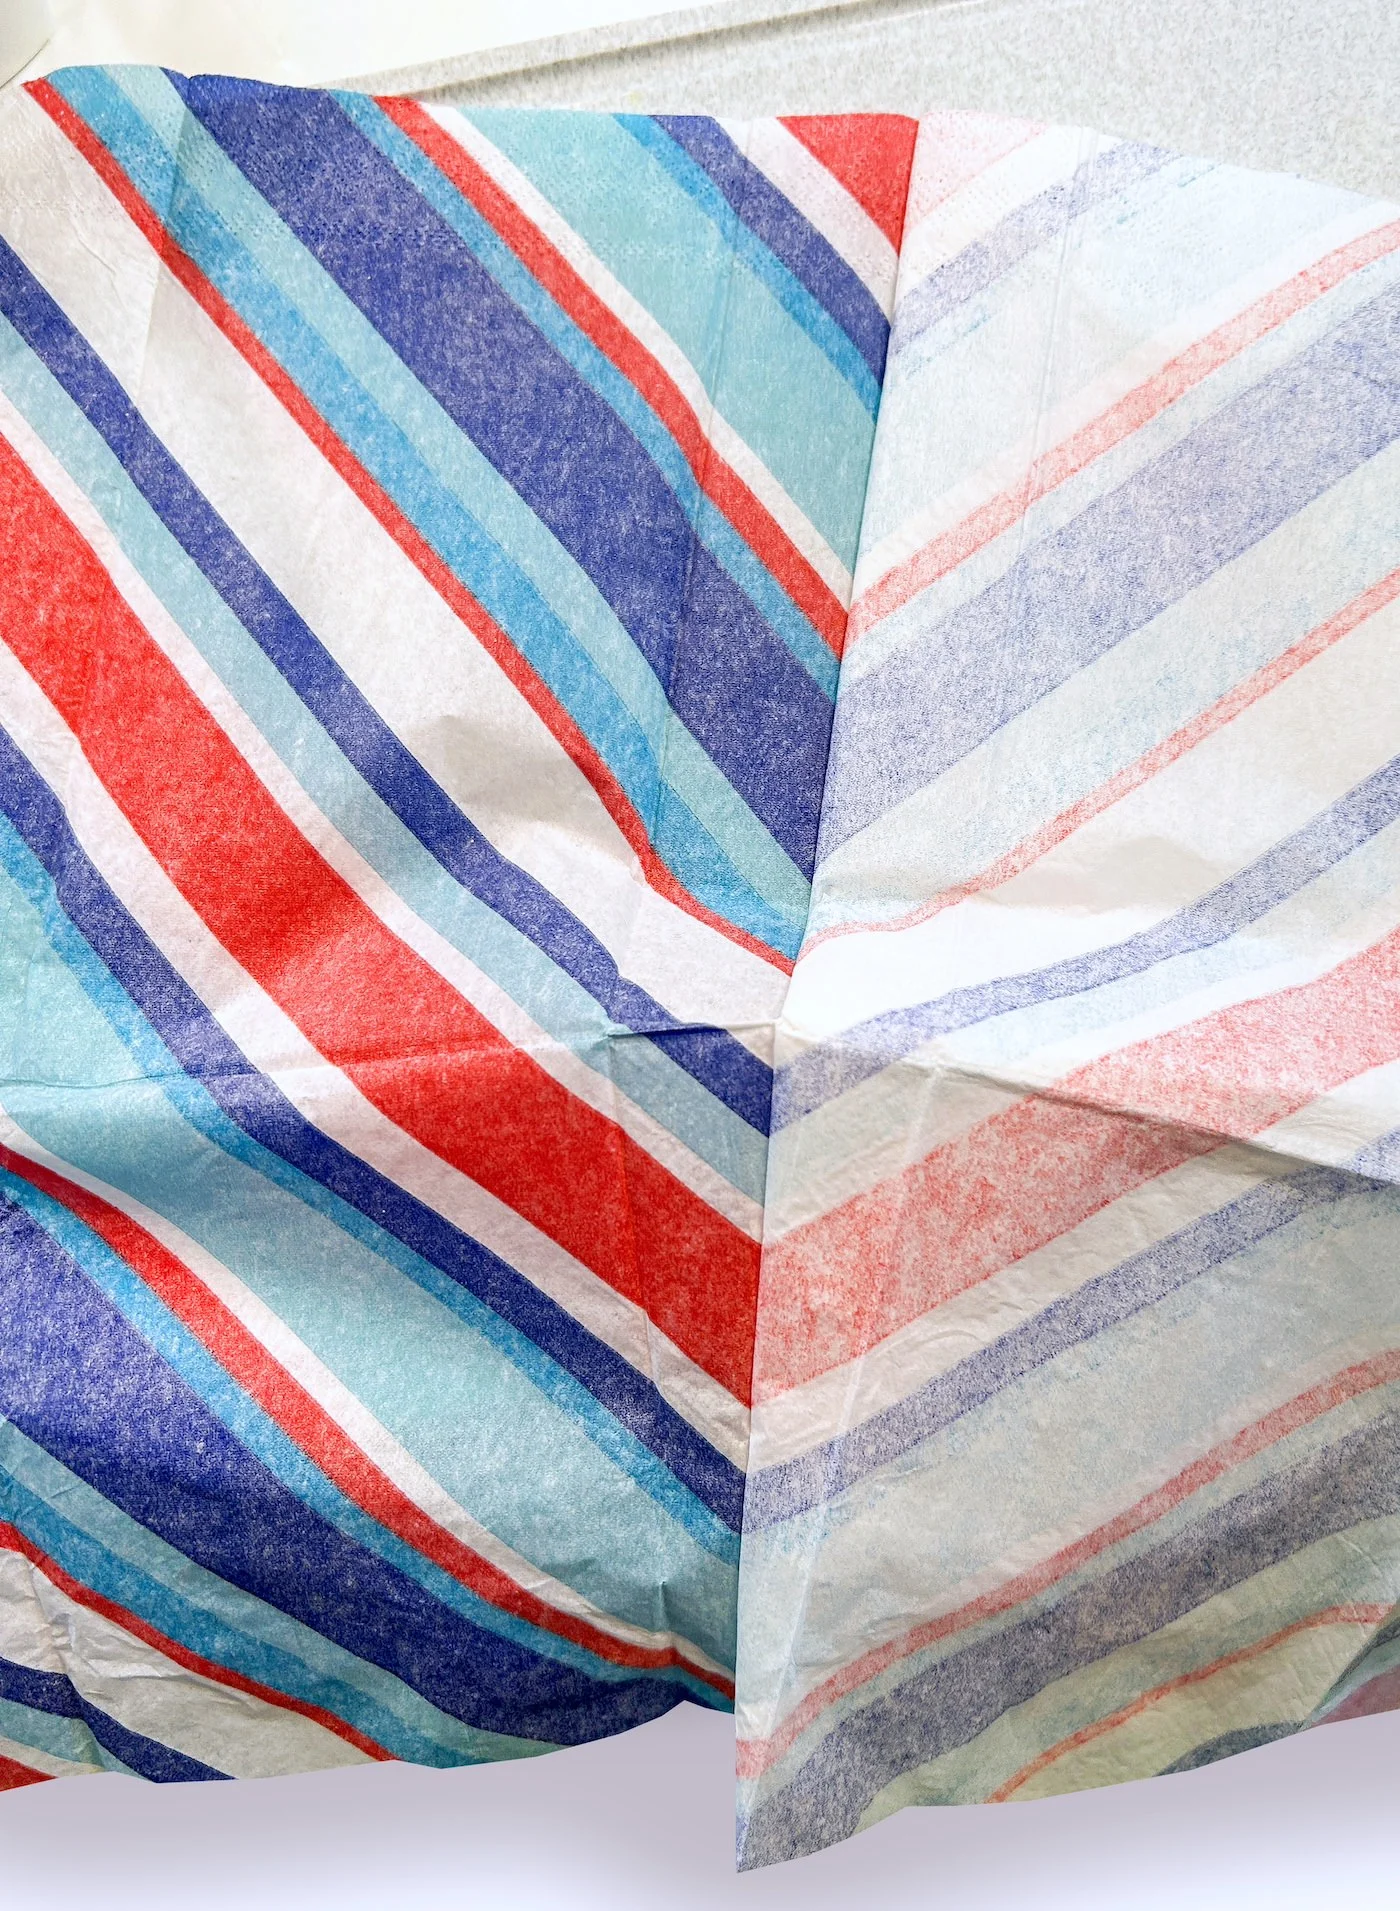 Separating a red, blue, and white striped napkin